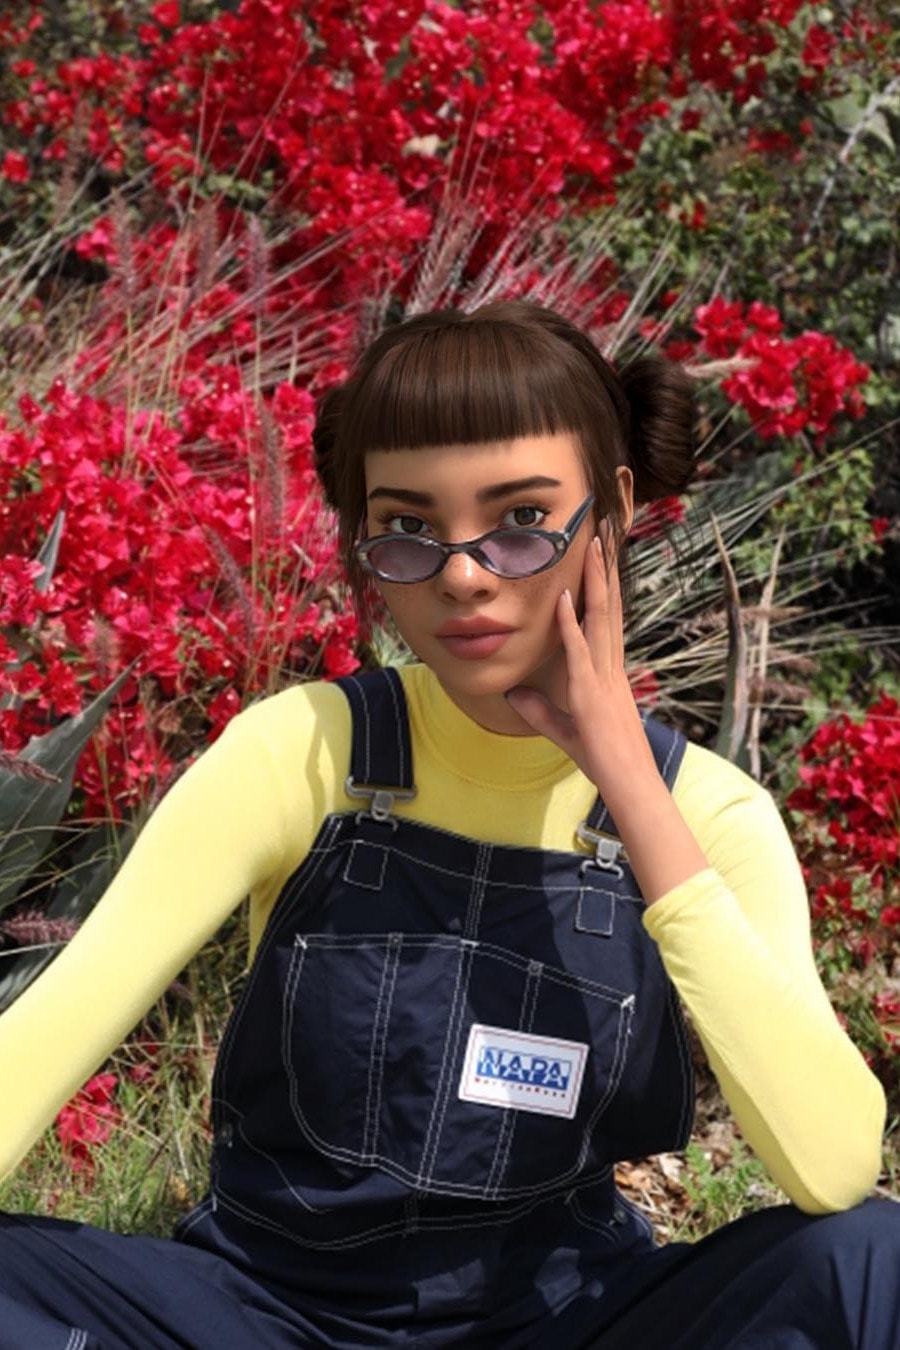 Lil Miquela Creators Receive $6 Million Funding Silicon Valley Research AI Influencer Robot